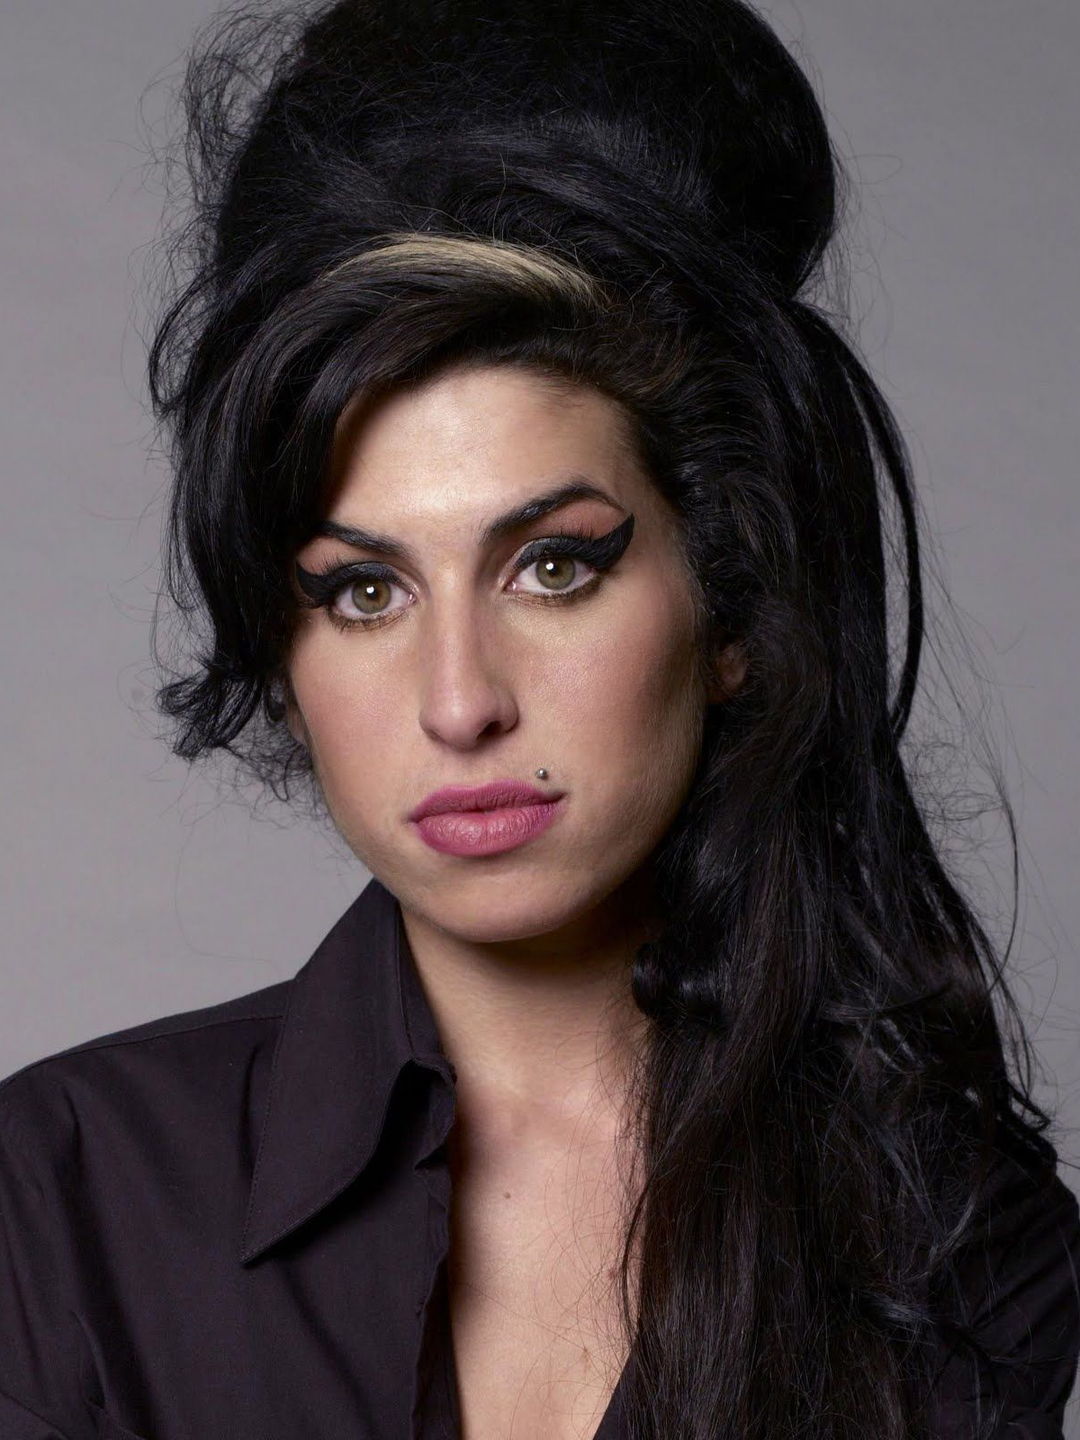 Amy Winehouse cause of death